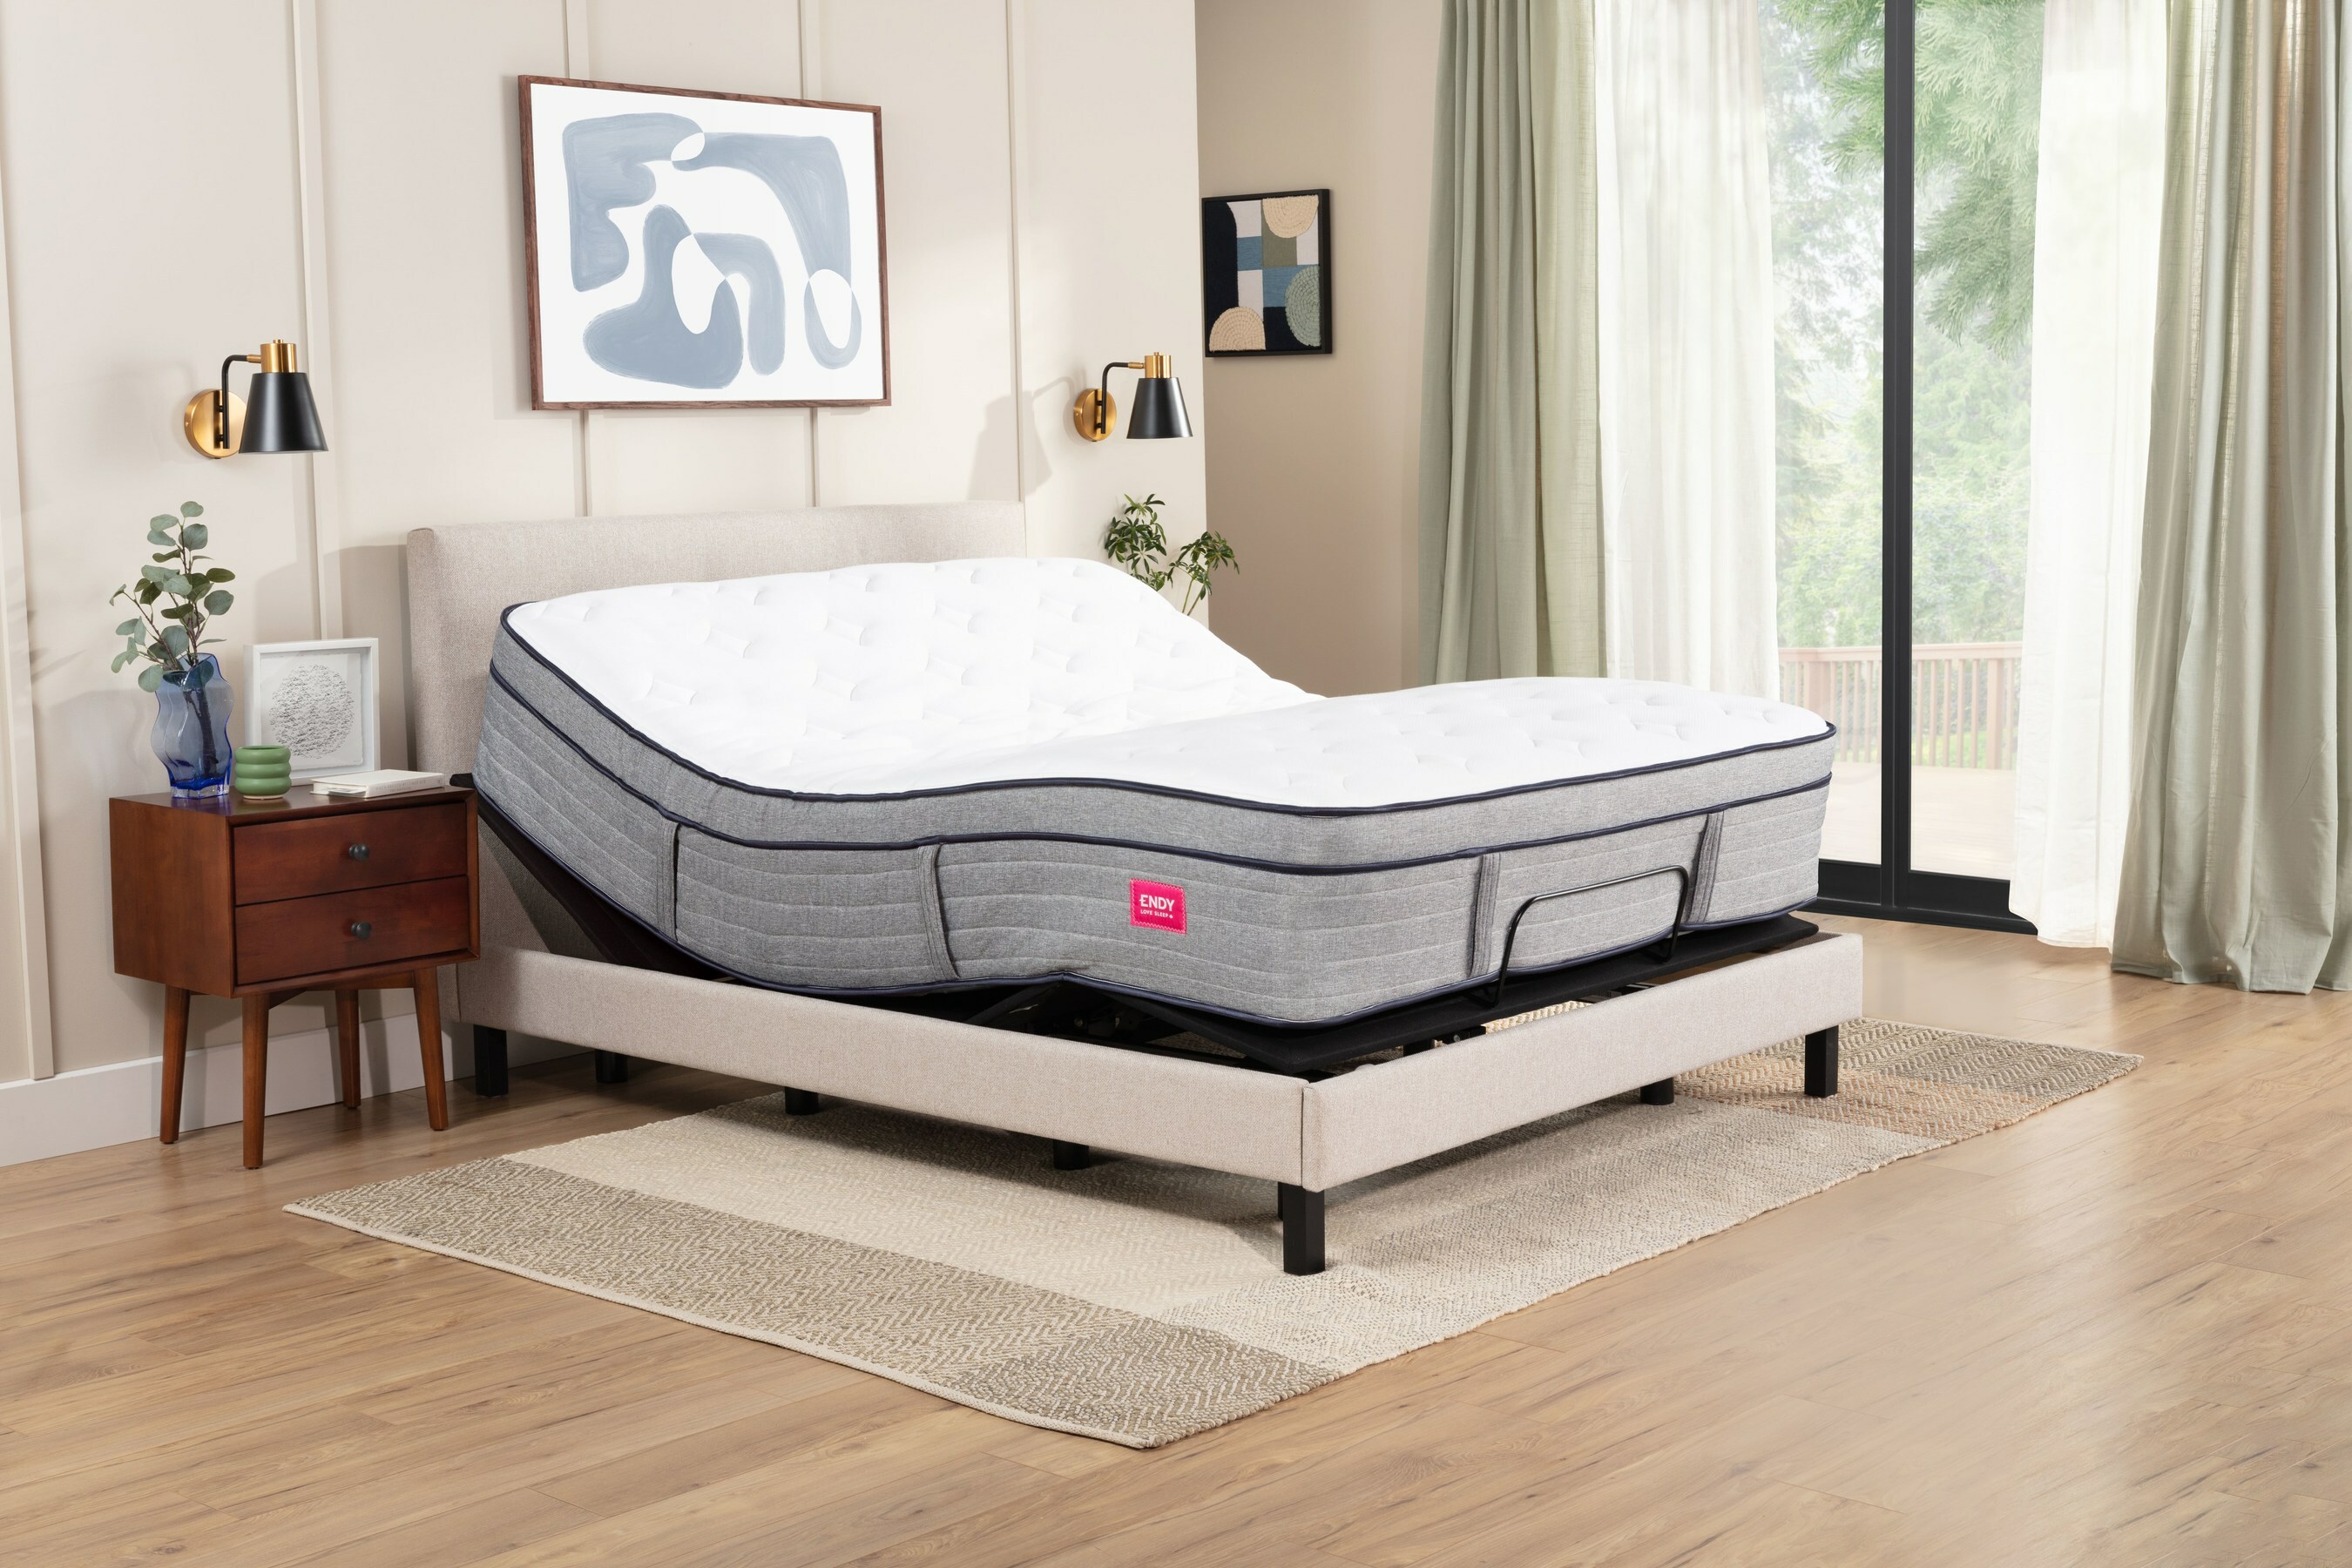 Canadian Sleep Brand Endy's Adjustable Bed Wins 2024 Product of